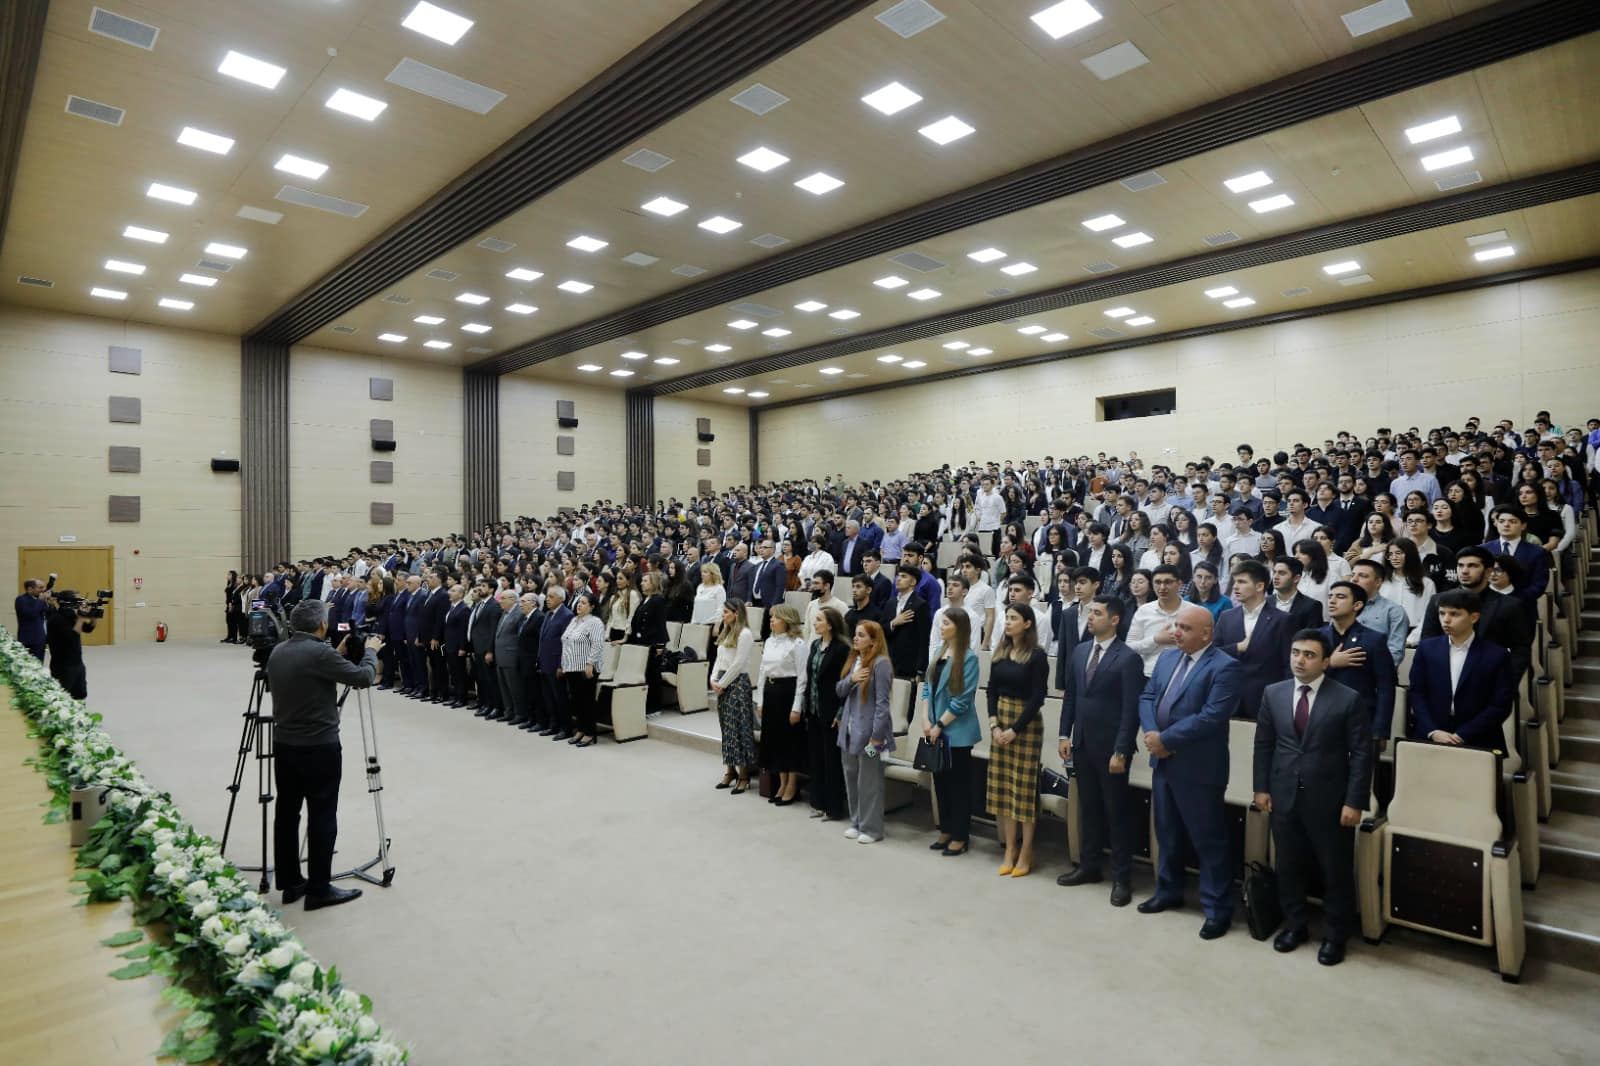 Lectures on ‘Heydar Aliyev and Azerbaijan's new oil strategy’ have been started (PHOTO)